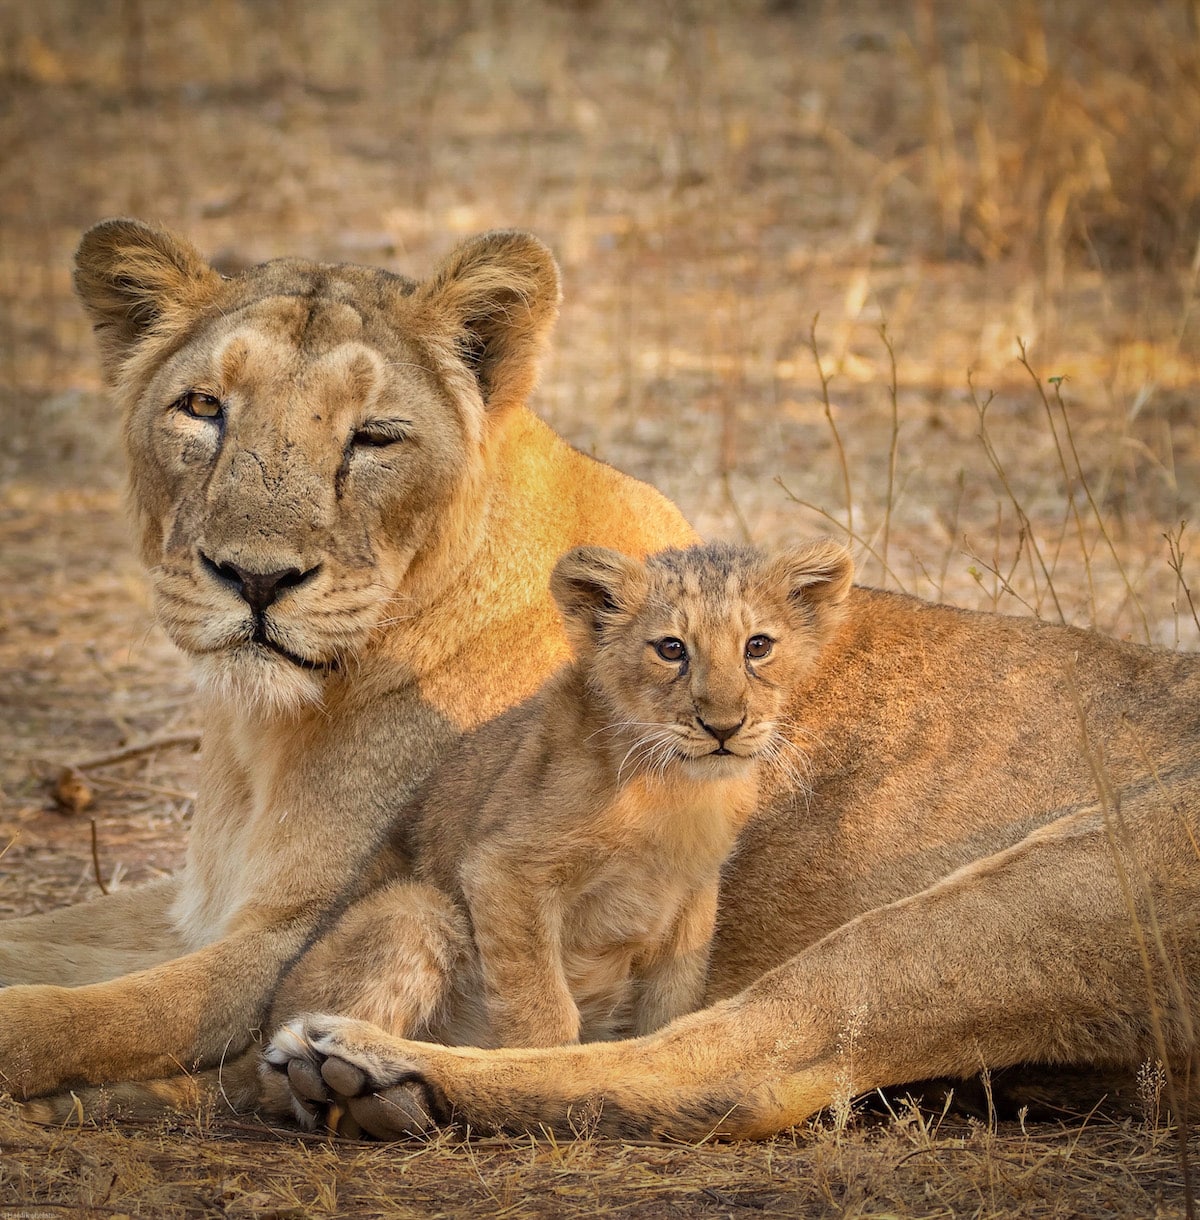 Lioness and Cub Lion in Gir National Park in India